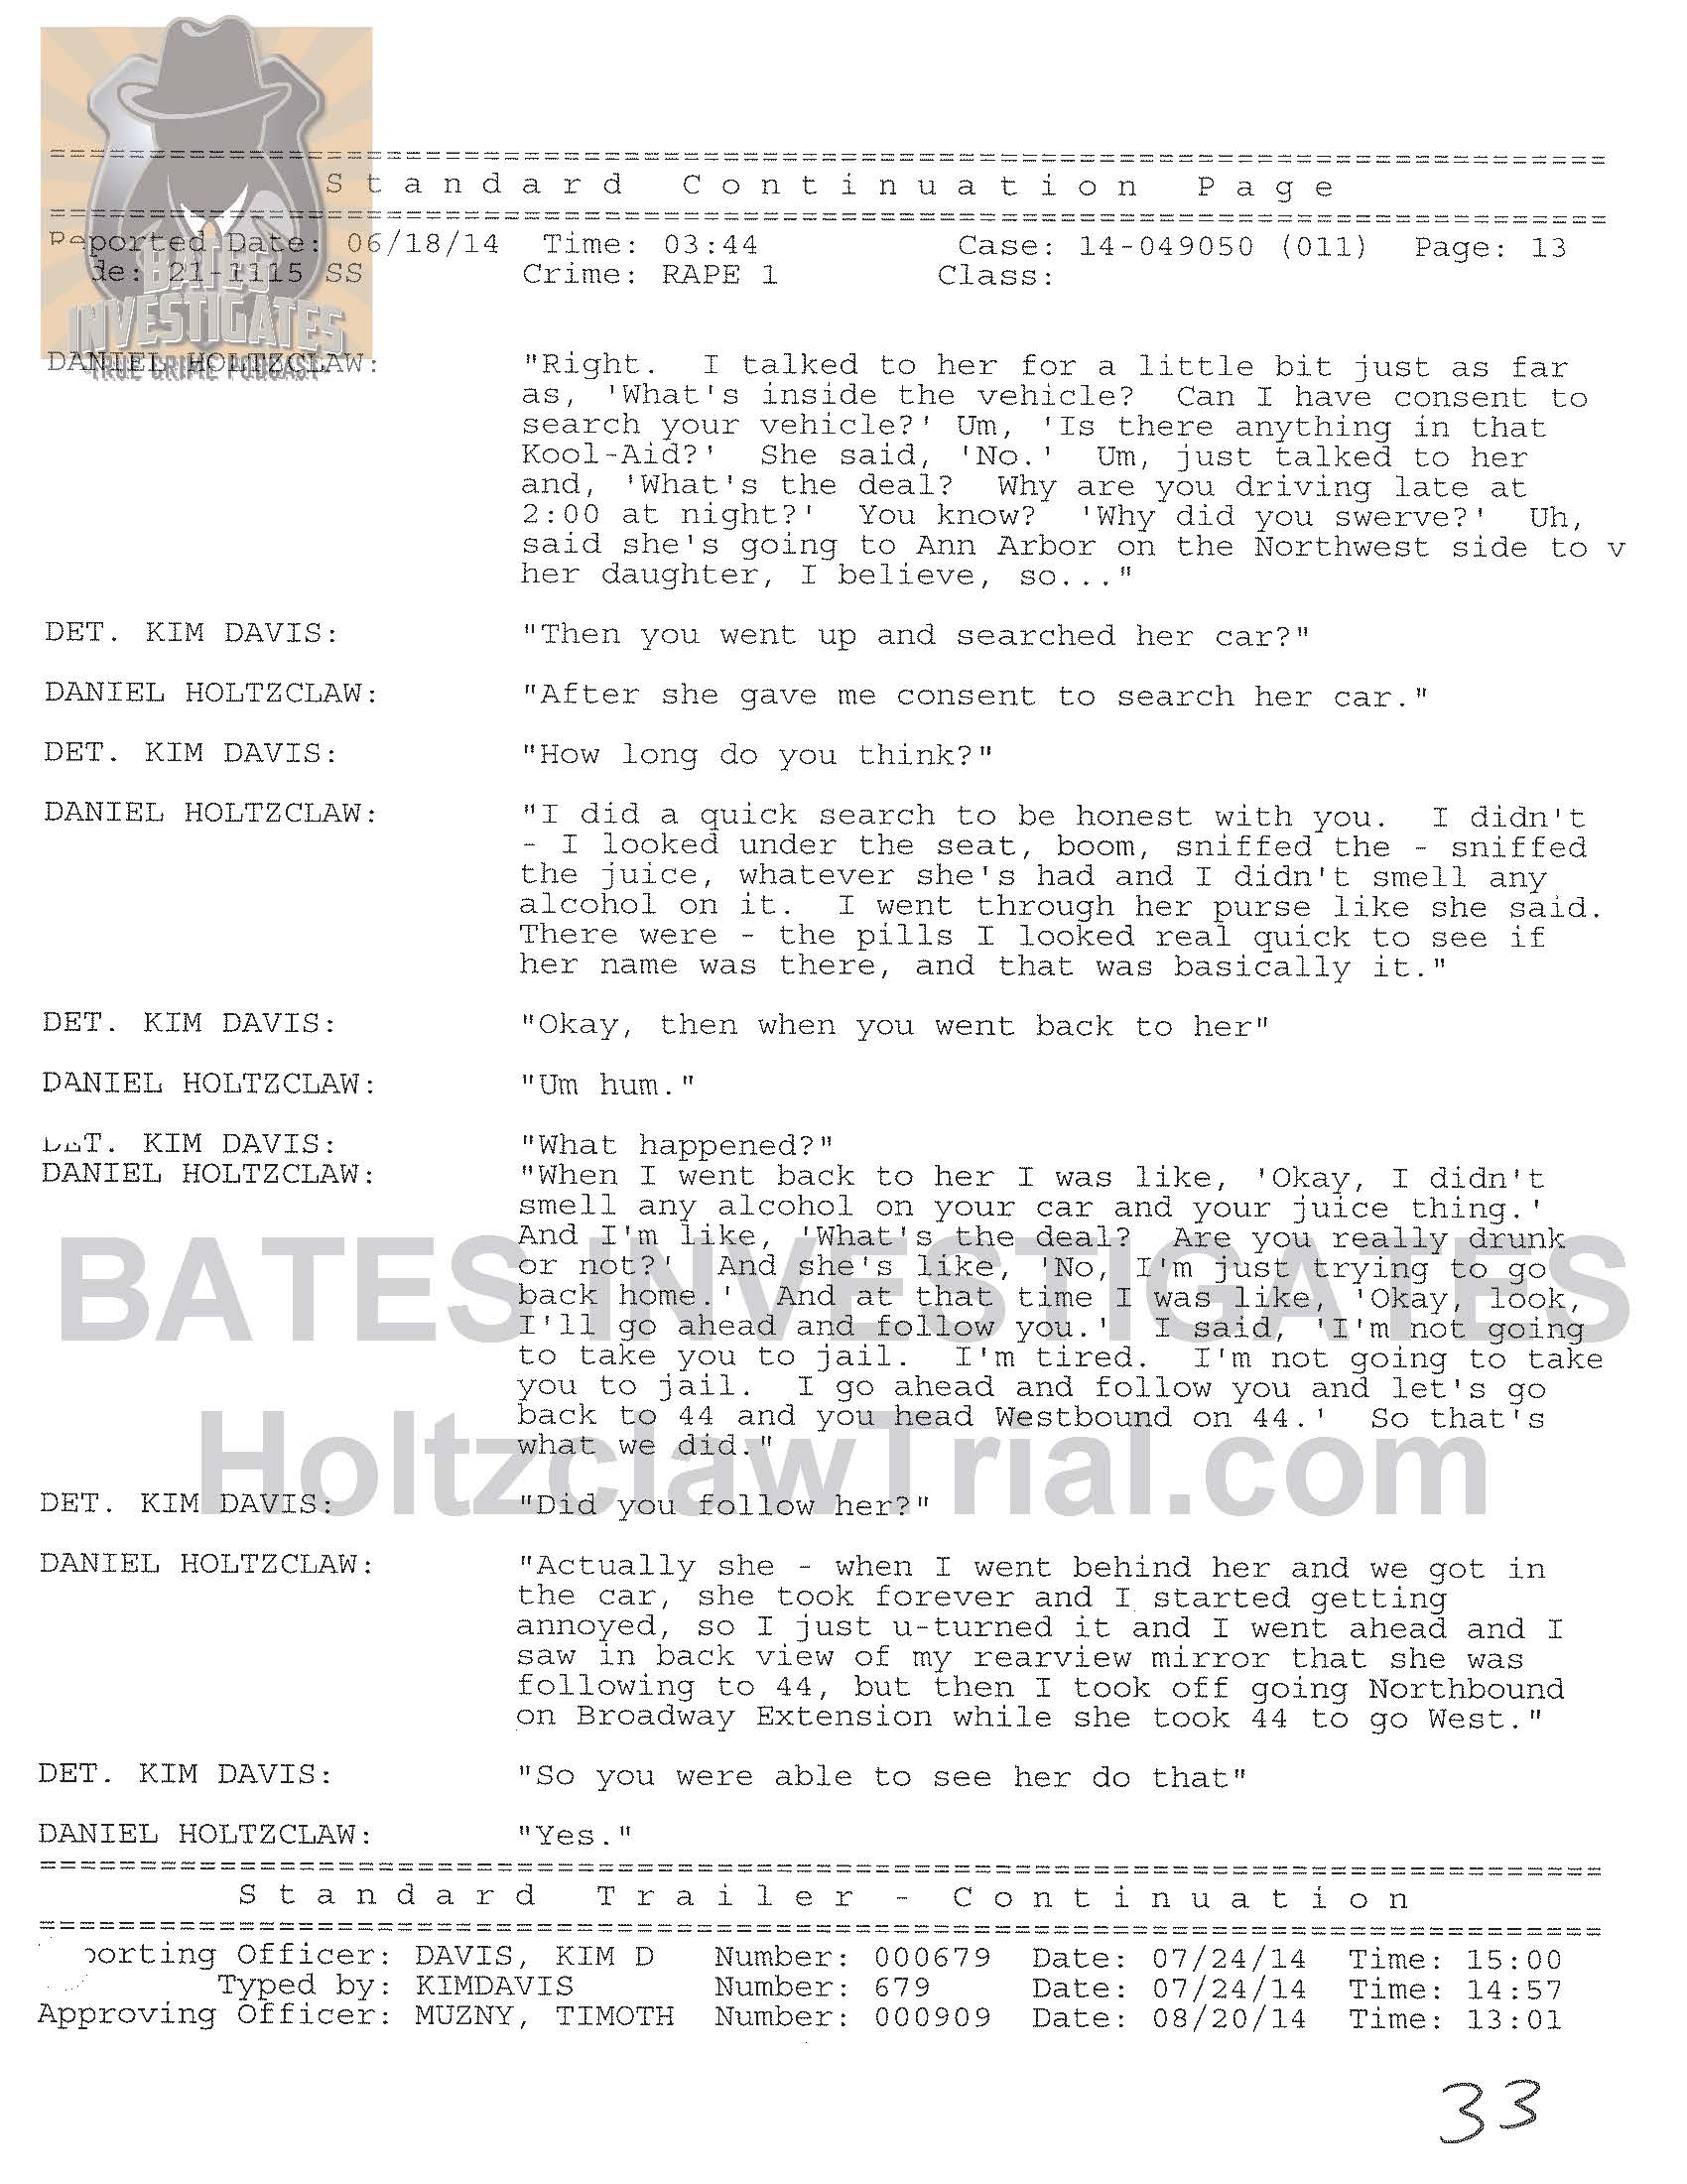 Holtzclaw Interrogation Transcript - Ep02 Redacted_Page_13.jpg